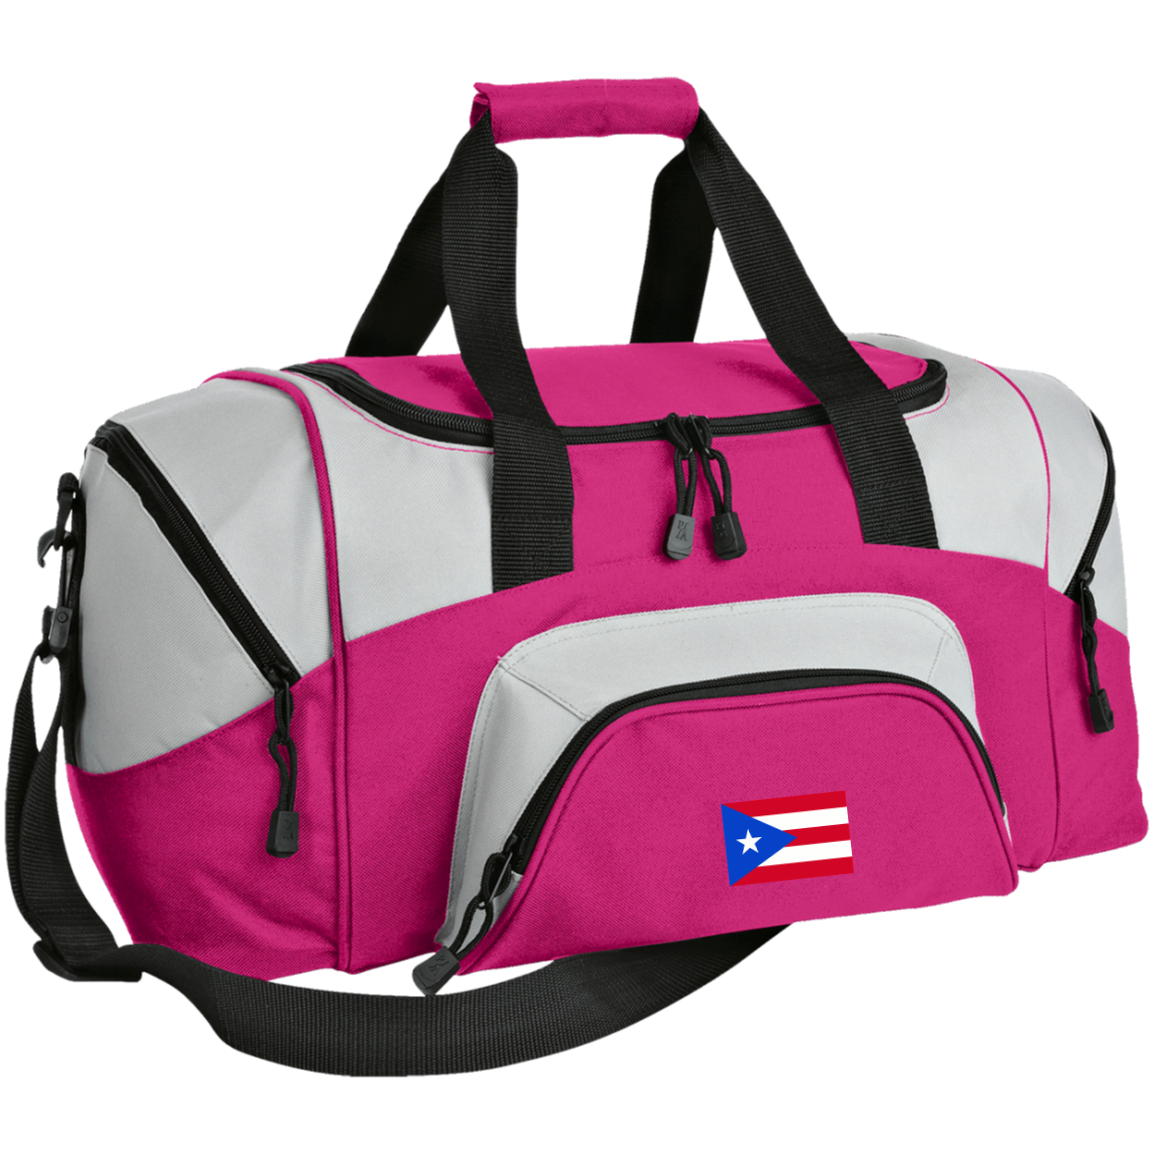 Sport Duffel Bag - Embroidered Puerto Rican Flag